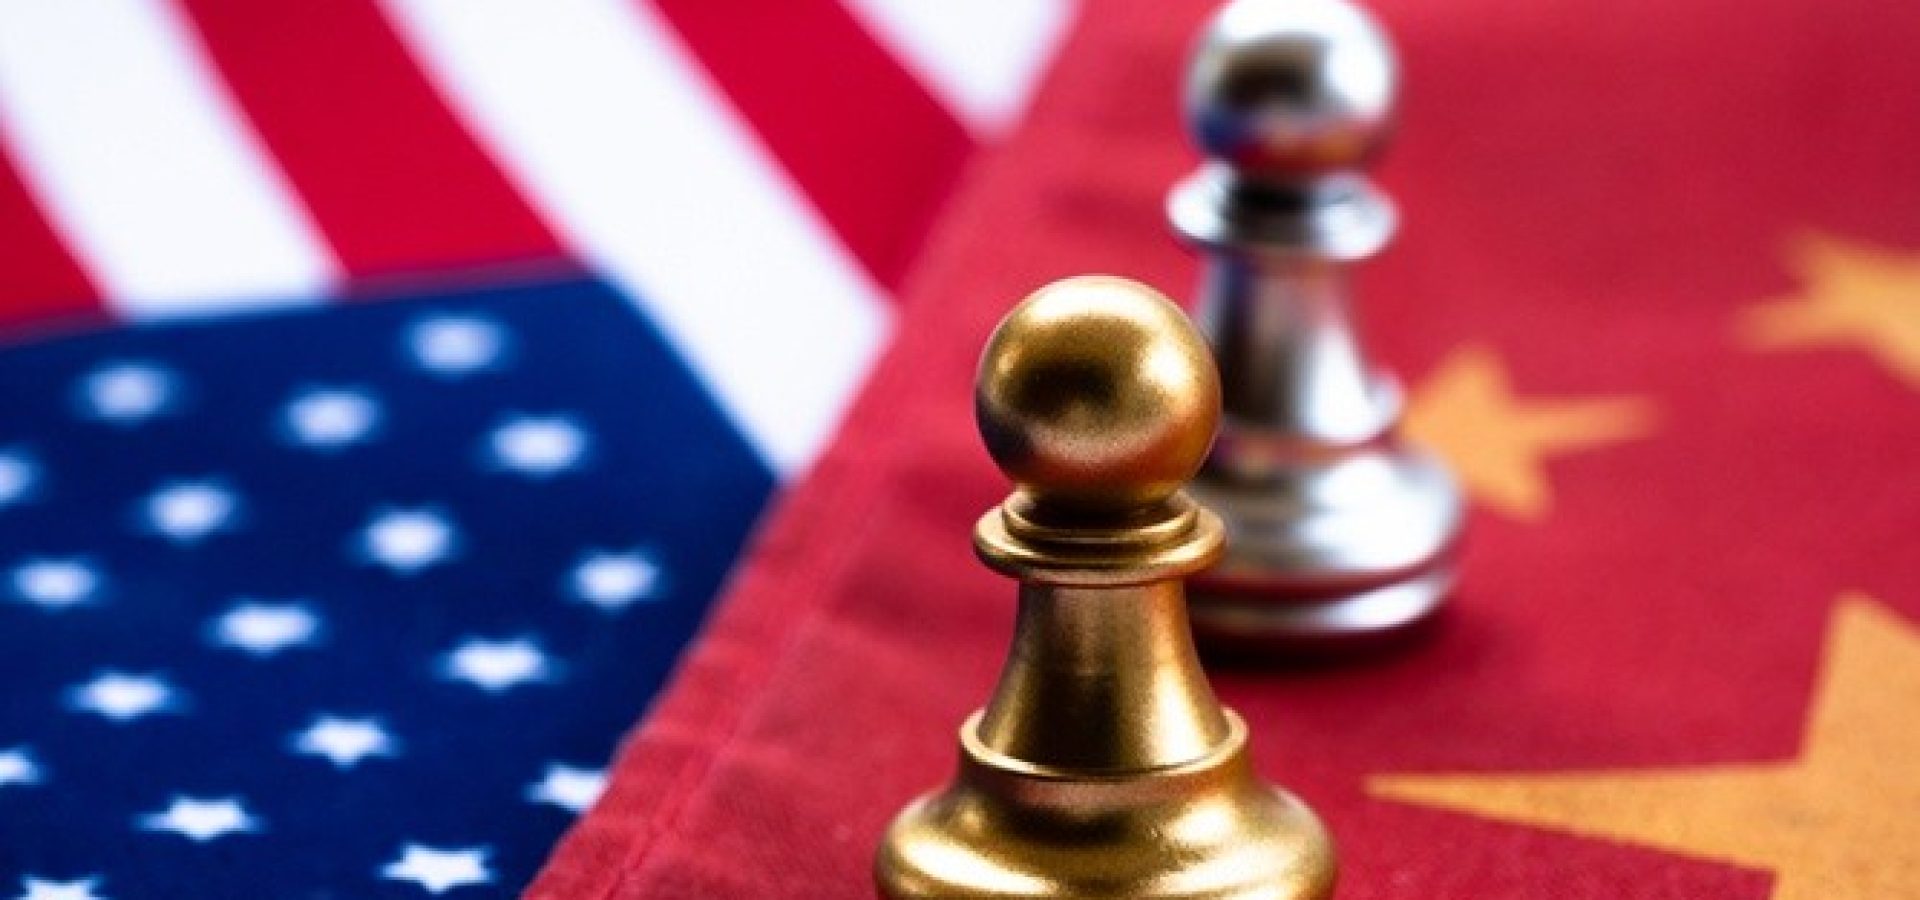 Wibest – United States: Two chess pieces over the American and Chinese flags